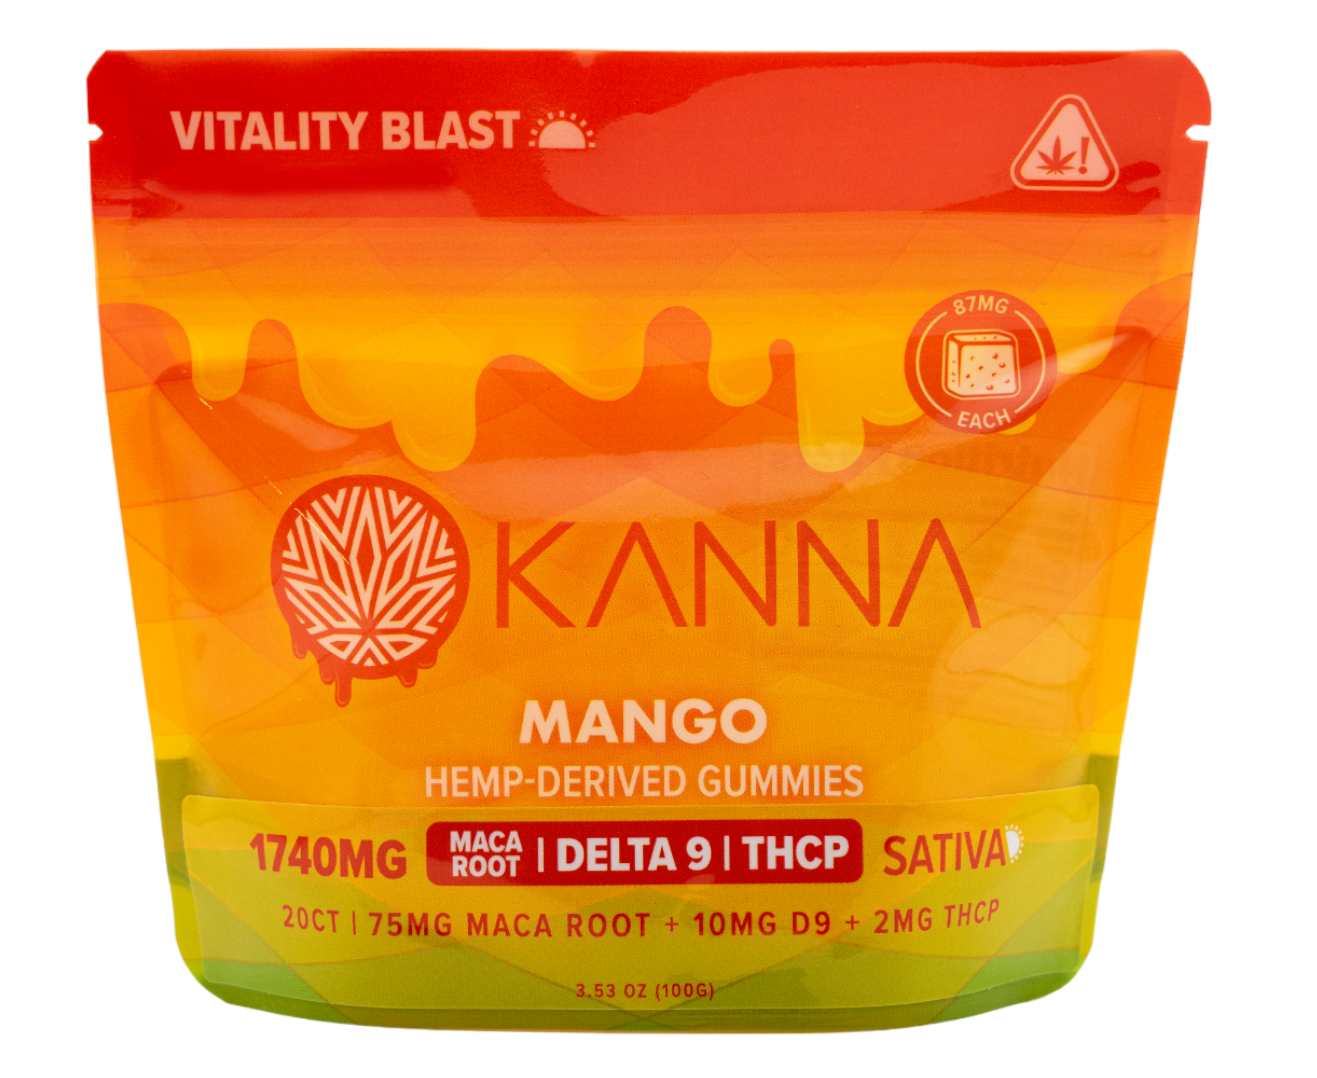 mango delta 9 gummies that are sativa and contain maca root